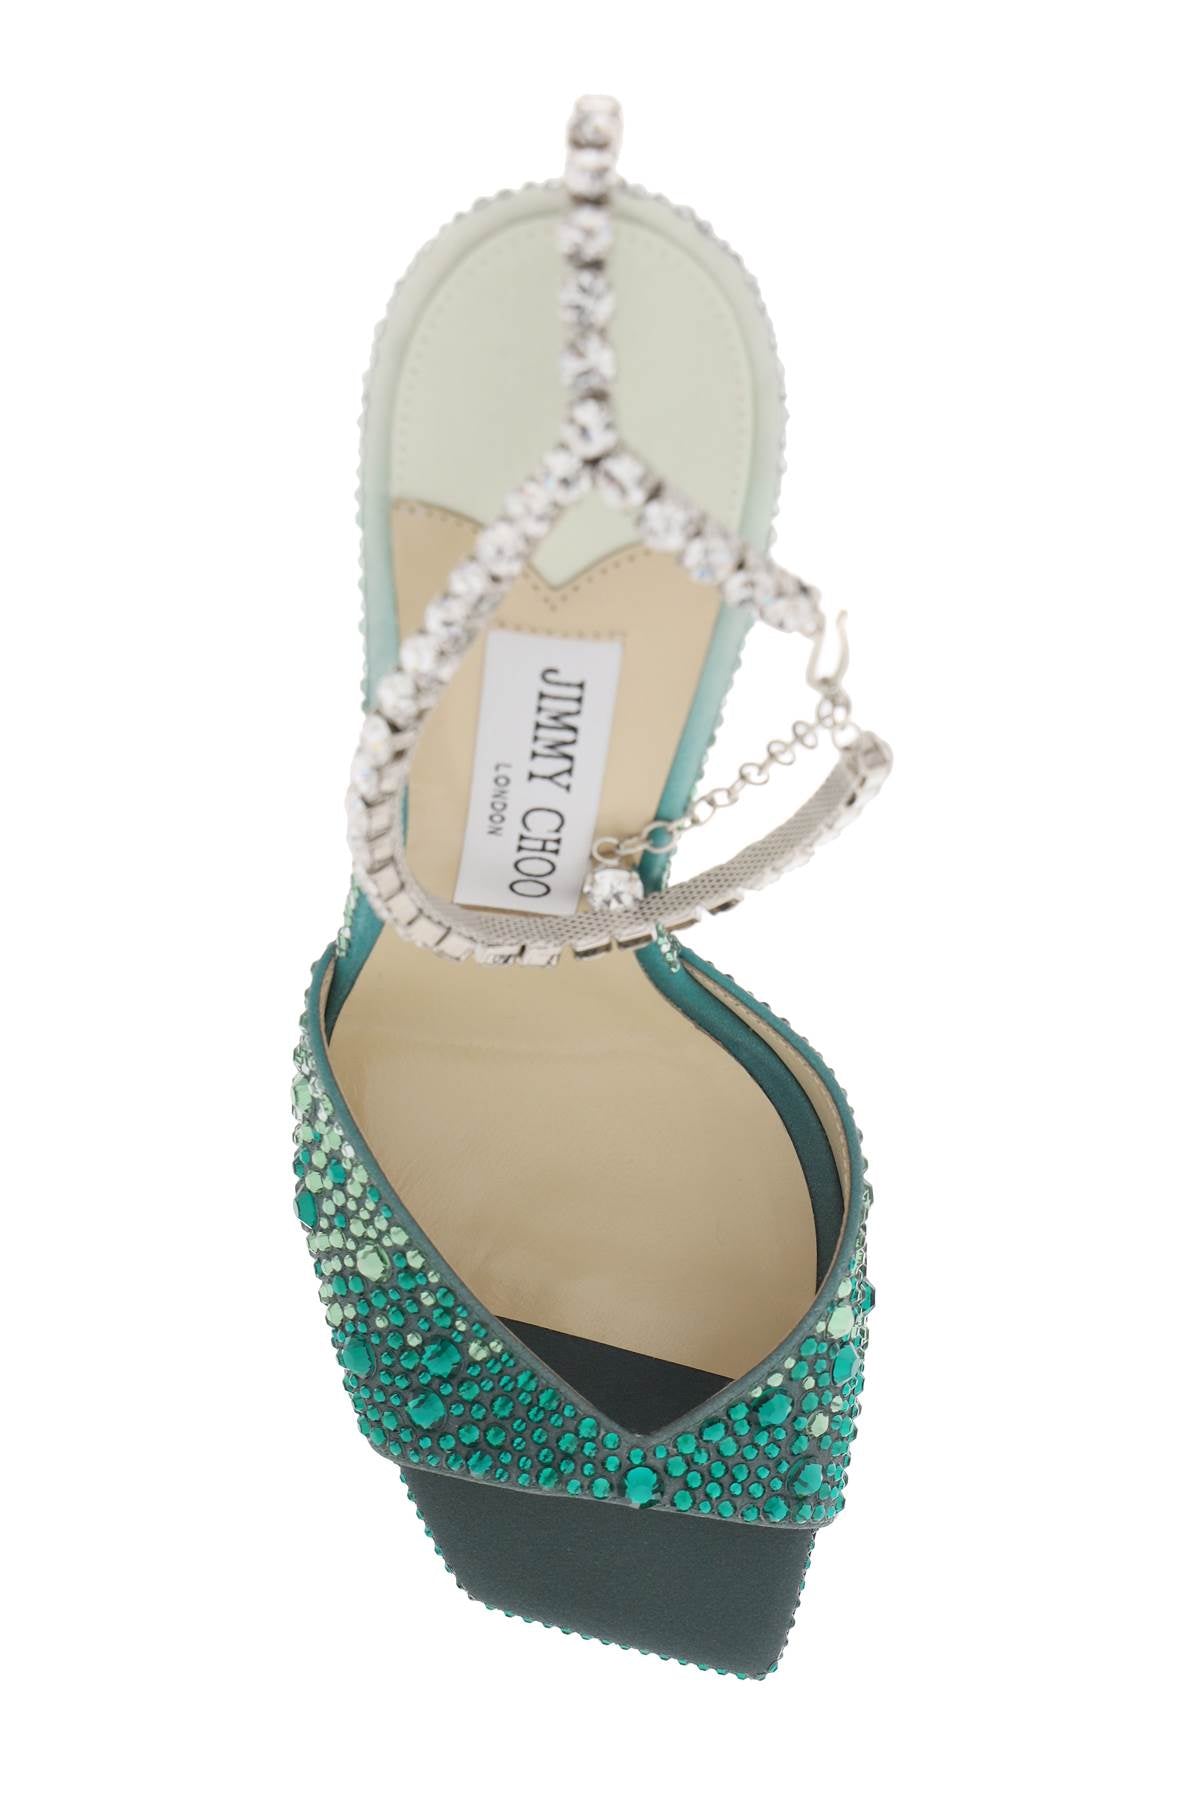 JIMMY CHOO Stunning Ankle Strap Sandals for Women with Handcrafted Crystals in Mixed Shades